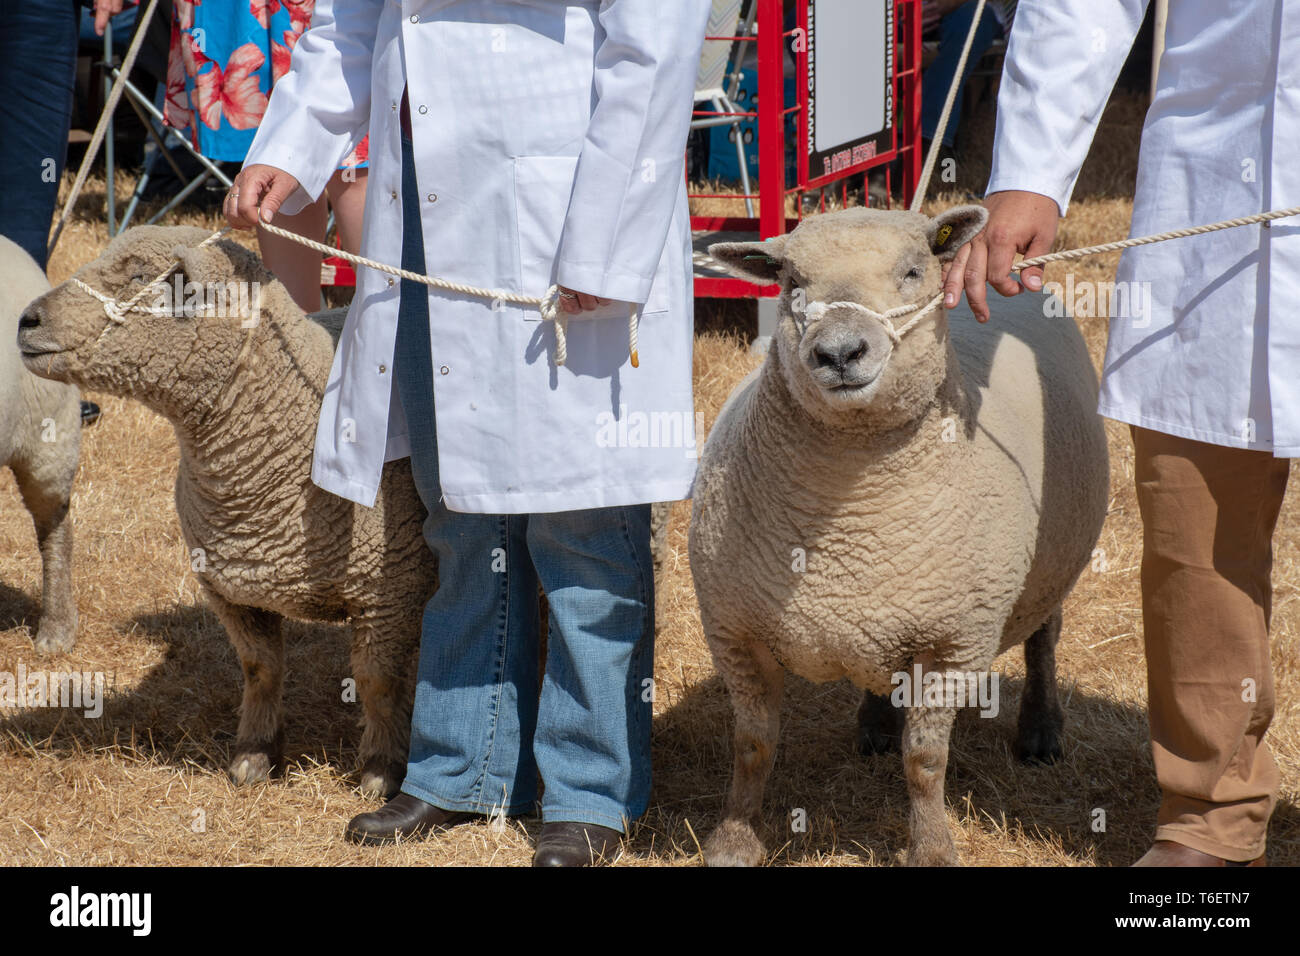 Sheep exhibited in agricultural show Stock Photo